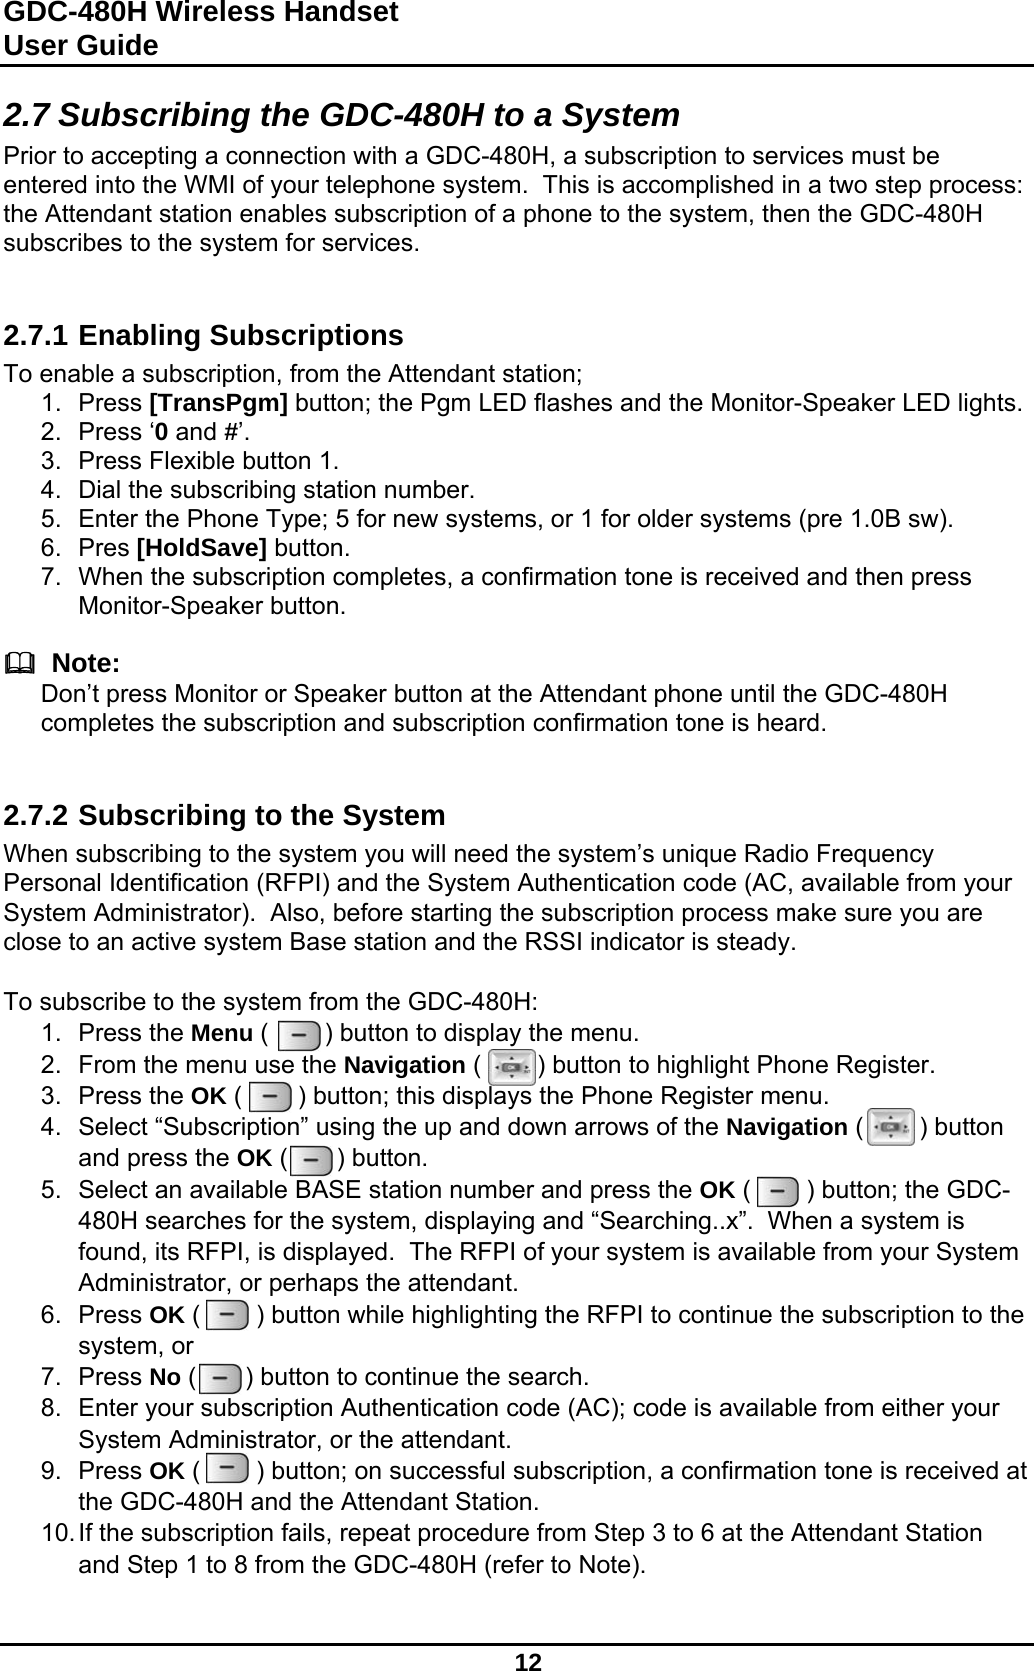 GDC-480H Wireless Handset User Guide   12  2.7 Subscribing the GDC-480H to a System Prior to accepting a connection with a GDC-480H, a subscription to services must be entered into the WMI of your telephone system.  This is accomplished in a two step process: the Attendant station enables subscription of a phone to the system, then the GDC-480H subscribes to the system for services.   2.7.1 Enabling Subscriptions To enable a subscription, from the Attendant station; 1. Press [TransPgm] button; the Pgm LED flashes and the Monitor-Speaker LED lights. 2. Press ‘0 and #’. 3.  Press Flexible button 1. 4.  Dial the subscribing station number. 5.  Enter the Phone Type; 5 for new systems, or 1 for older systems (pre 1.0B sw). 6. Pres [HoldSave] button. 7.  When the subscription completes, a confirmation tone is received and then press Monitor-Speaker button.    Note: Don’t press Monitor or Speaker button at the Attendant phone until the GDC-480H completes the subscription and subscription confirmation tone is heard.   2.7.2 Subscribing to the System When subscribing to the system you will need the system’s unique Radio Frequency Personal Identification (RFPI) and the System Authentication code (AC, available from your System Administrator).  Also, before starting the subscription process make sure you are close to an active system Base station and the RSSI indicator is steady.  To subscribe to the system from the GDC-480H:  1. Press the Menu (        ) button to display the menu. 2.  From the menu use the Navigation (        ) button to highlight Phone Register. 3. Press the OK (        ) button; this displays the Phone Register menu.  4.  Select “Subscription” using the up and down arrows of the Navigation (        ) button and press the OK (       ) button.  5.  Select an available BASE station number and press the OK (        ) button; the GDC-480H searches for the system, displaying and “Searching..x”.  When a system is found, its RFPI, is displayed.  The RFPI of your system is available from your System Administrator, or perhaps the attendant. 6. Press OK (        ) button while highlighting the RFPI to continue the subscription to the system, or 7. Press No (       ) button to continue the search. 8.  Enter your subscription Authentication code (AC); code is available from either your System Administrator, or the attendant. 9. Press OK (        ) button; on successful subscription, a confirmation tone is received at the GDC-480H and the Attendant Station. 10. If the subscription fails, repeat procedure from Step 3 to 6 at the Attendant Station and Step 1 to 8 from the GDC-480H (refer to Note).   